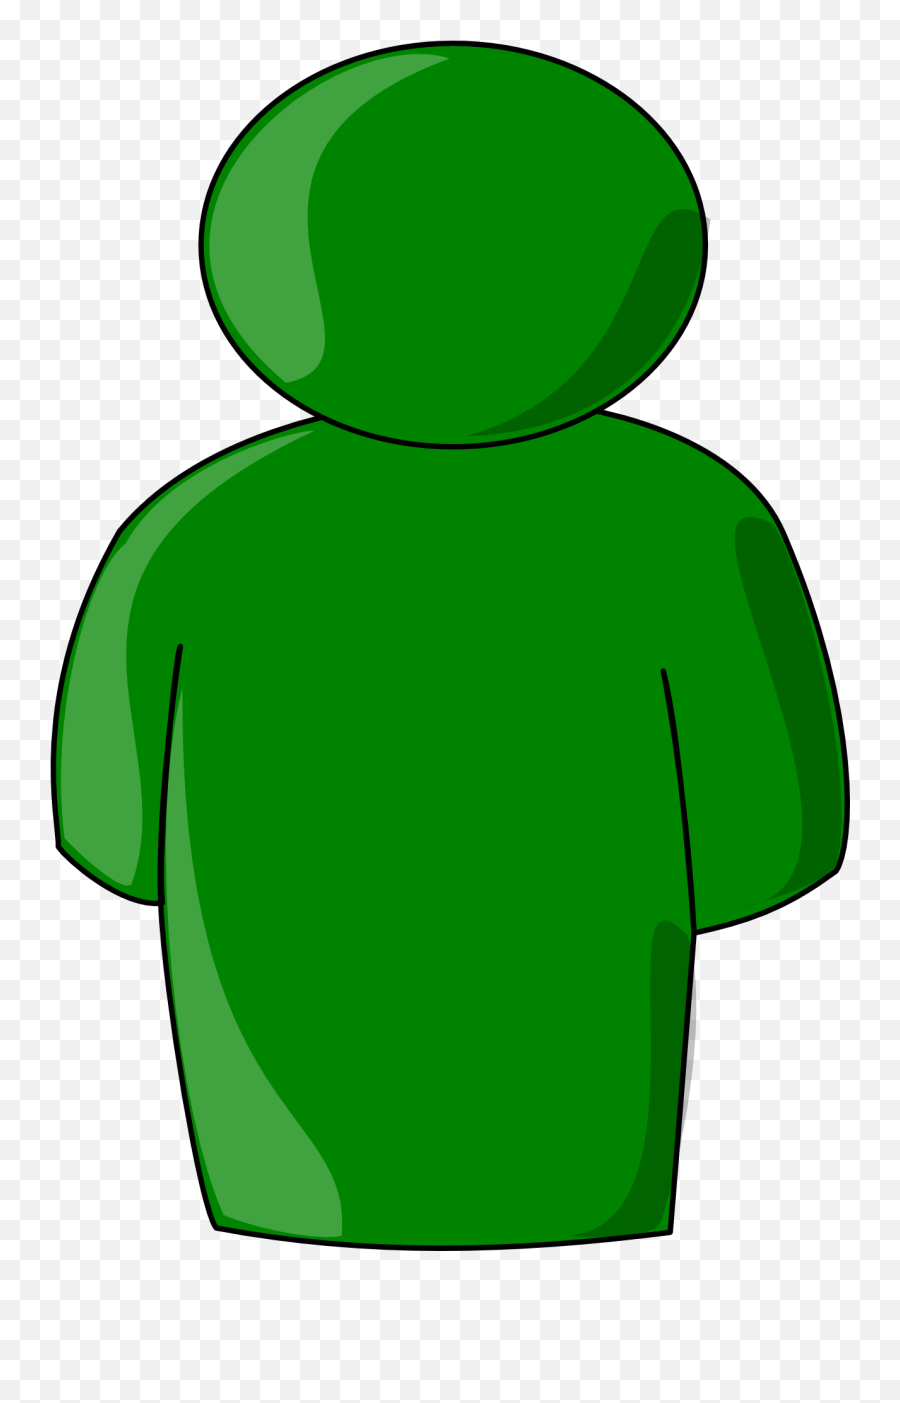 Clipart Of Green Avatar Free Image Download Emoji,Lego Head Clipart